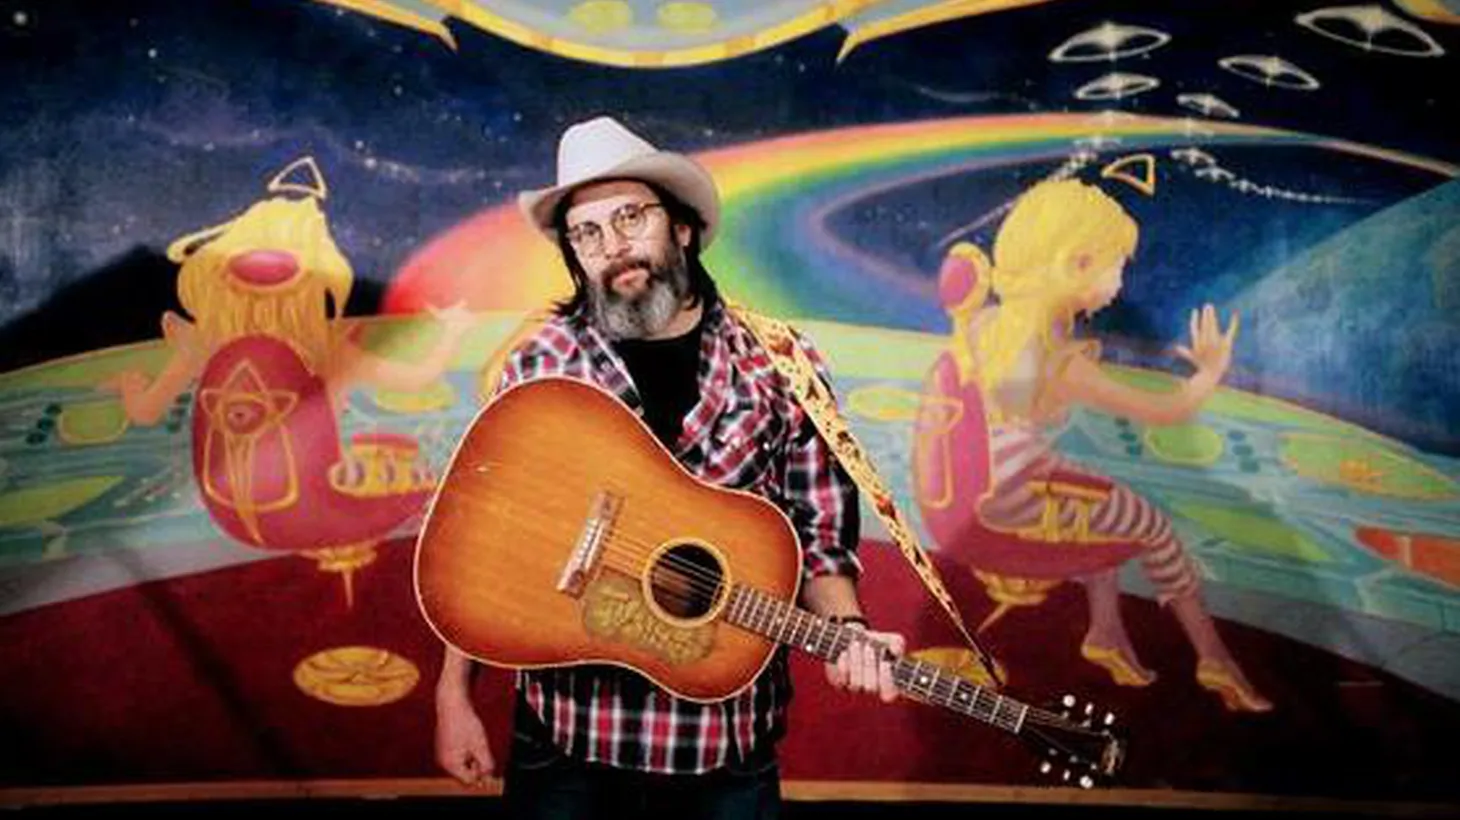 Rebel rocker Steve Earle pays homage to his musical role model Townes Van Zandt with a tribute of covers. We'll hear about their friendship -- and the music it inspired -- when Steve Earle joins Morning Becomes Eclectic in live performance at 11:15am.